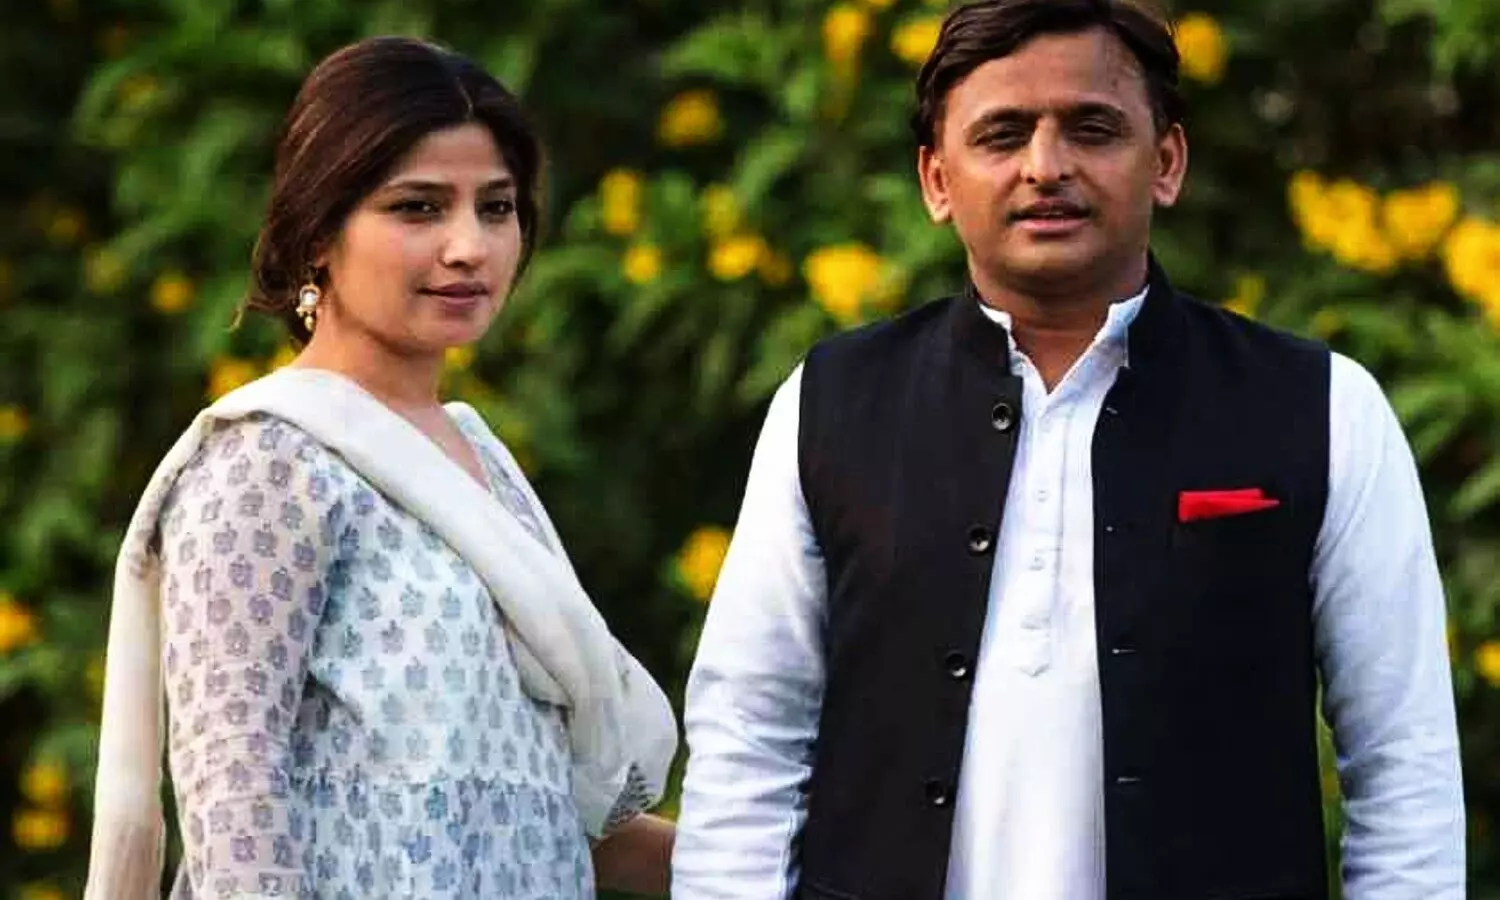 Akhilesh Yadav and Dimple Yadav have a happy marriage